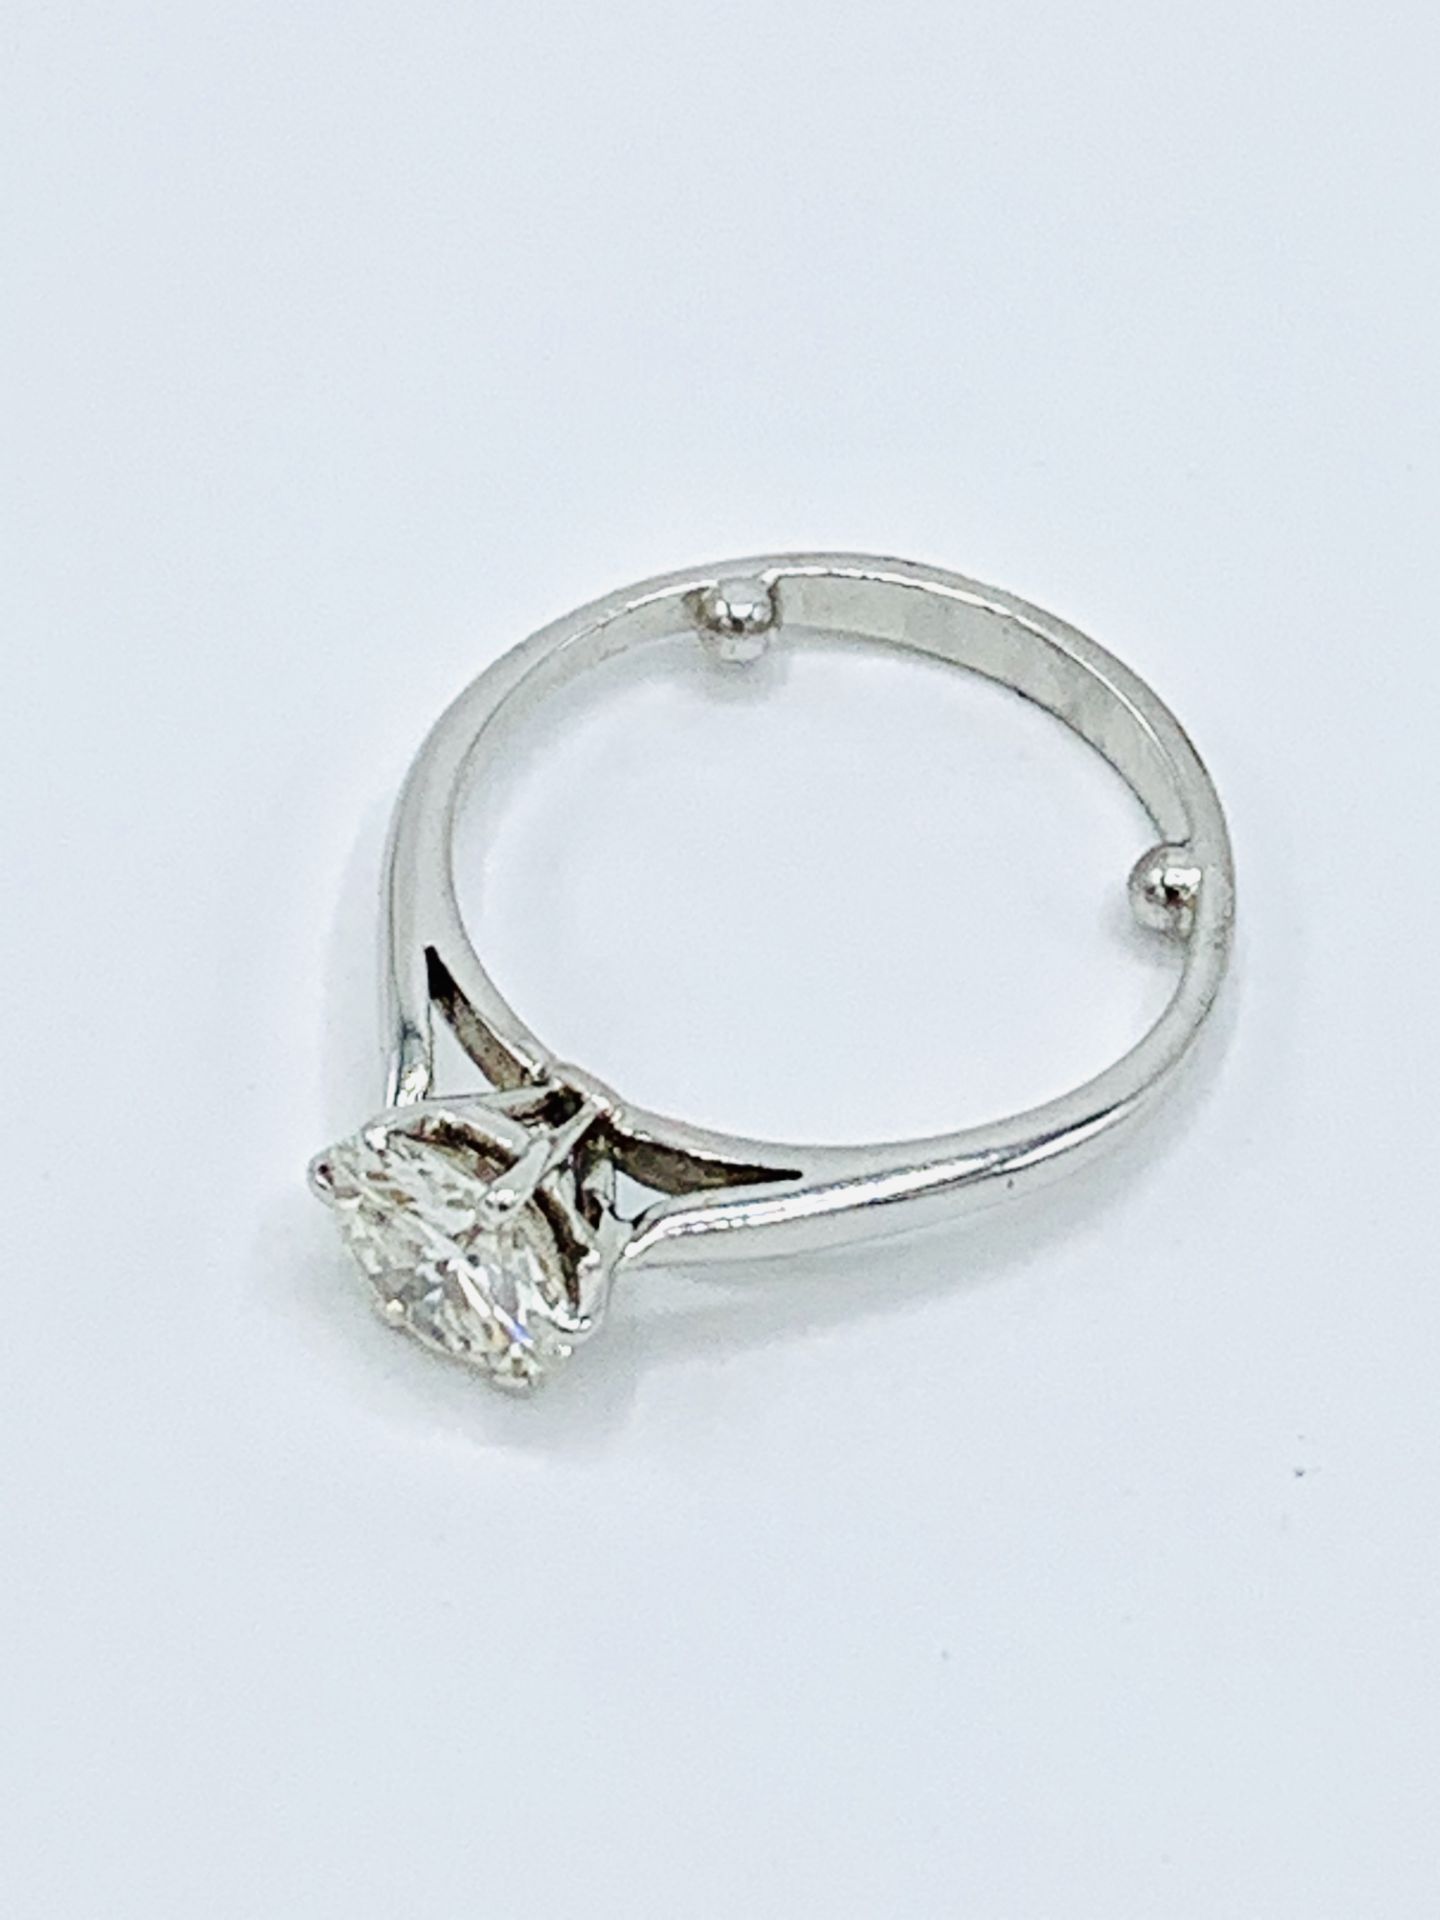 White gold diamond solitaire ring. - Image 6 of 9